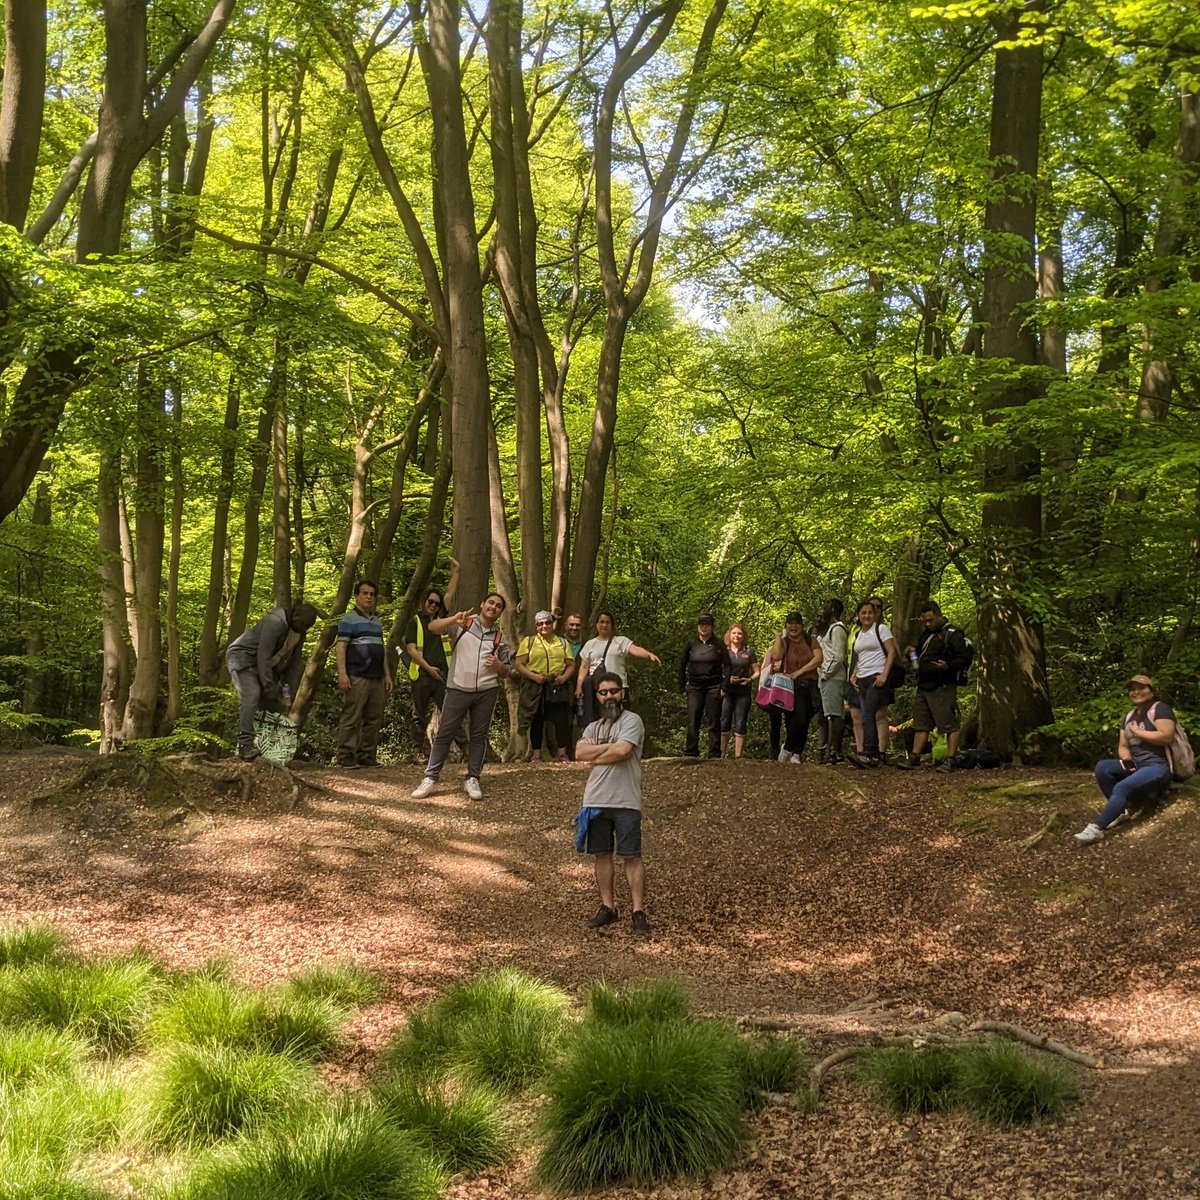 On Sat we enjoyed a spectacular guided walk through Epping Forest as part of #urbantreefestival!
Our @EppingForestHT guide brought us deep into the forest via undulating Iron age earthworks, Tudor hunting lodges  & gravel-pit lakes teeming with clumsy ducklings
#RefugeesWelcome